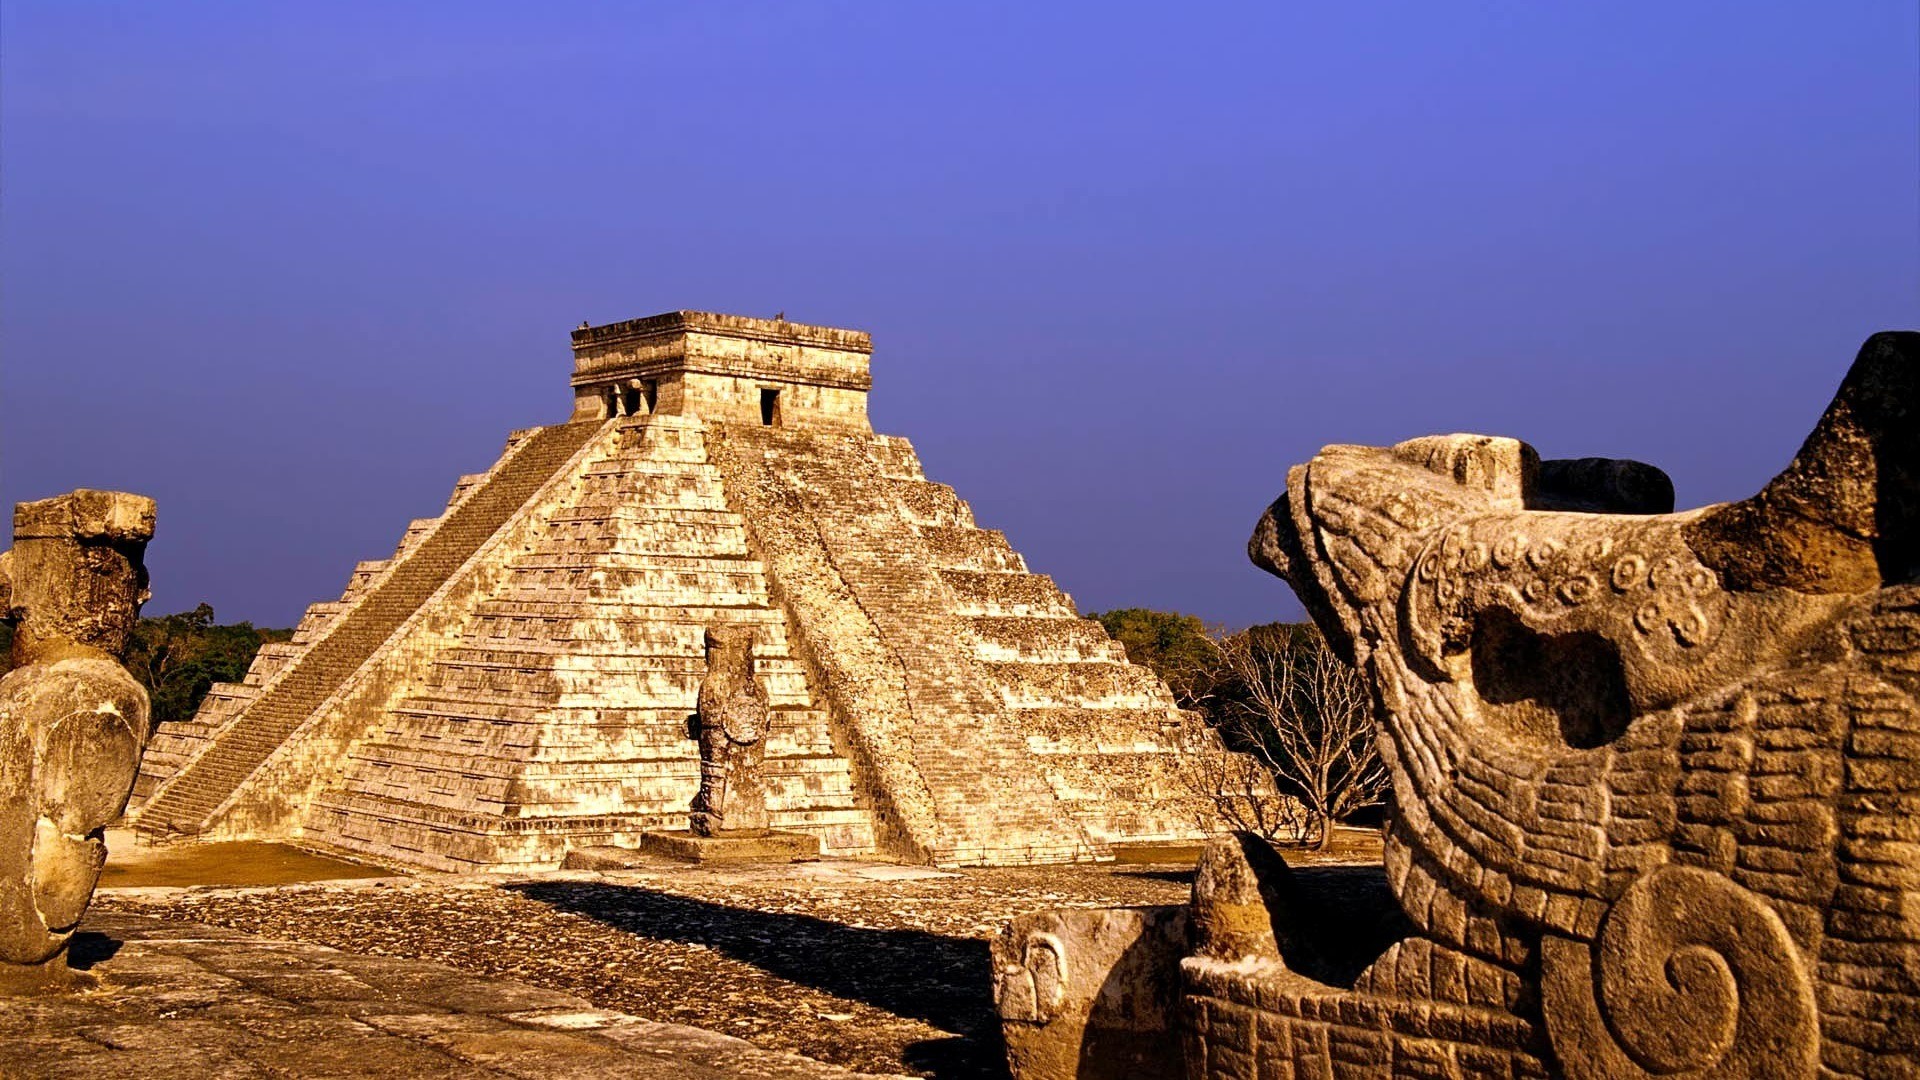 mexico wallpaper,historic site,landmark,ancient history,archaeological site,wonders of the world